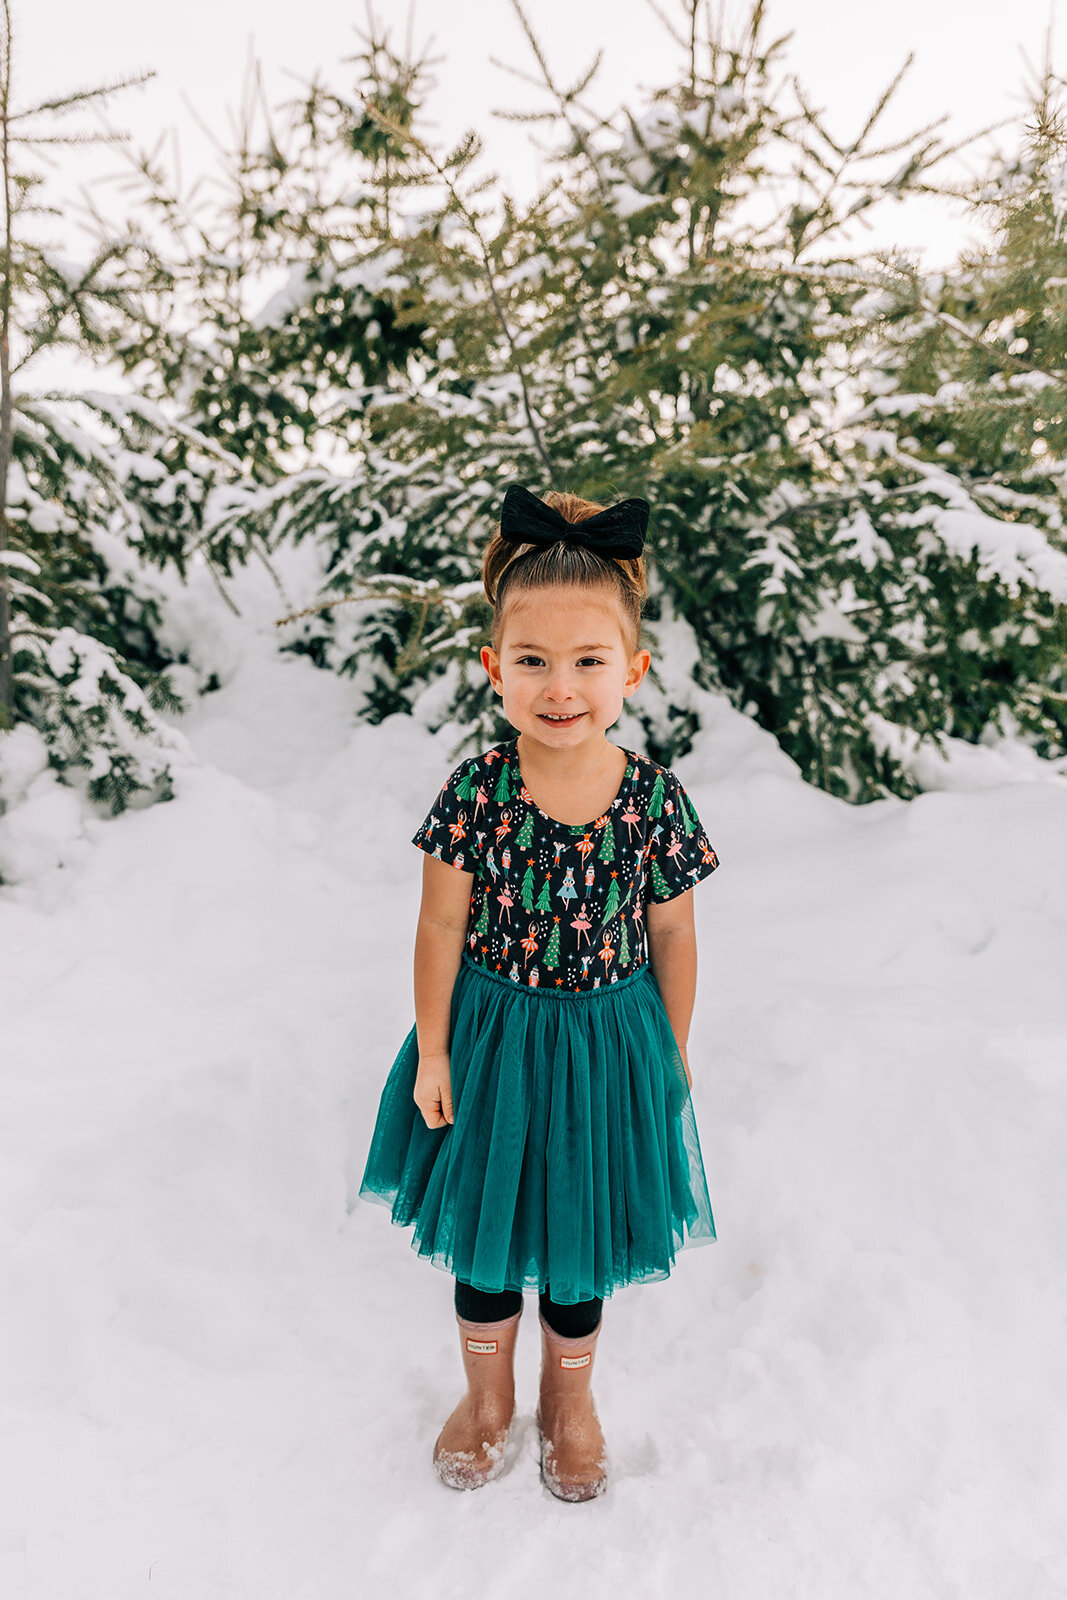  teal tulle dress hair bow and ponytail hairstyle inspo winter fashion family pictures daughters family picture styling inspiration family pose ideas winter photoshoot snowy pictures adams acres tree farm family photographers in utah professional fam